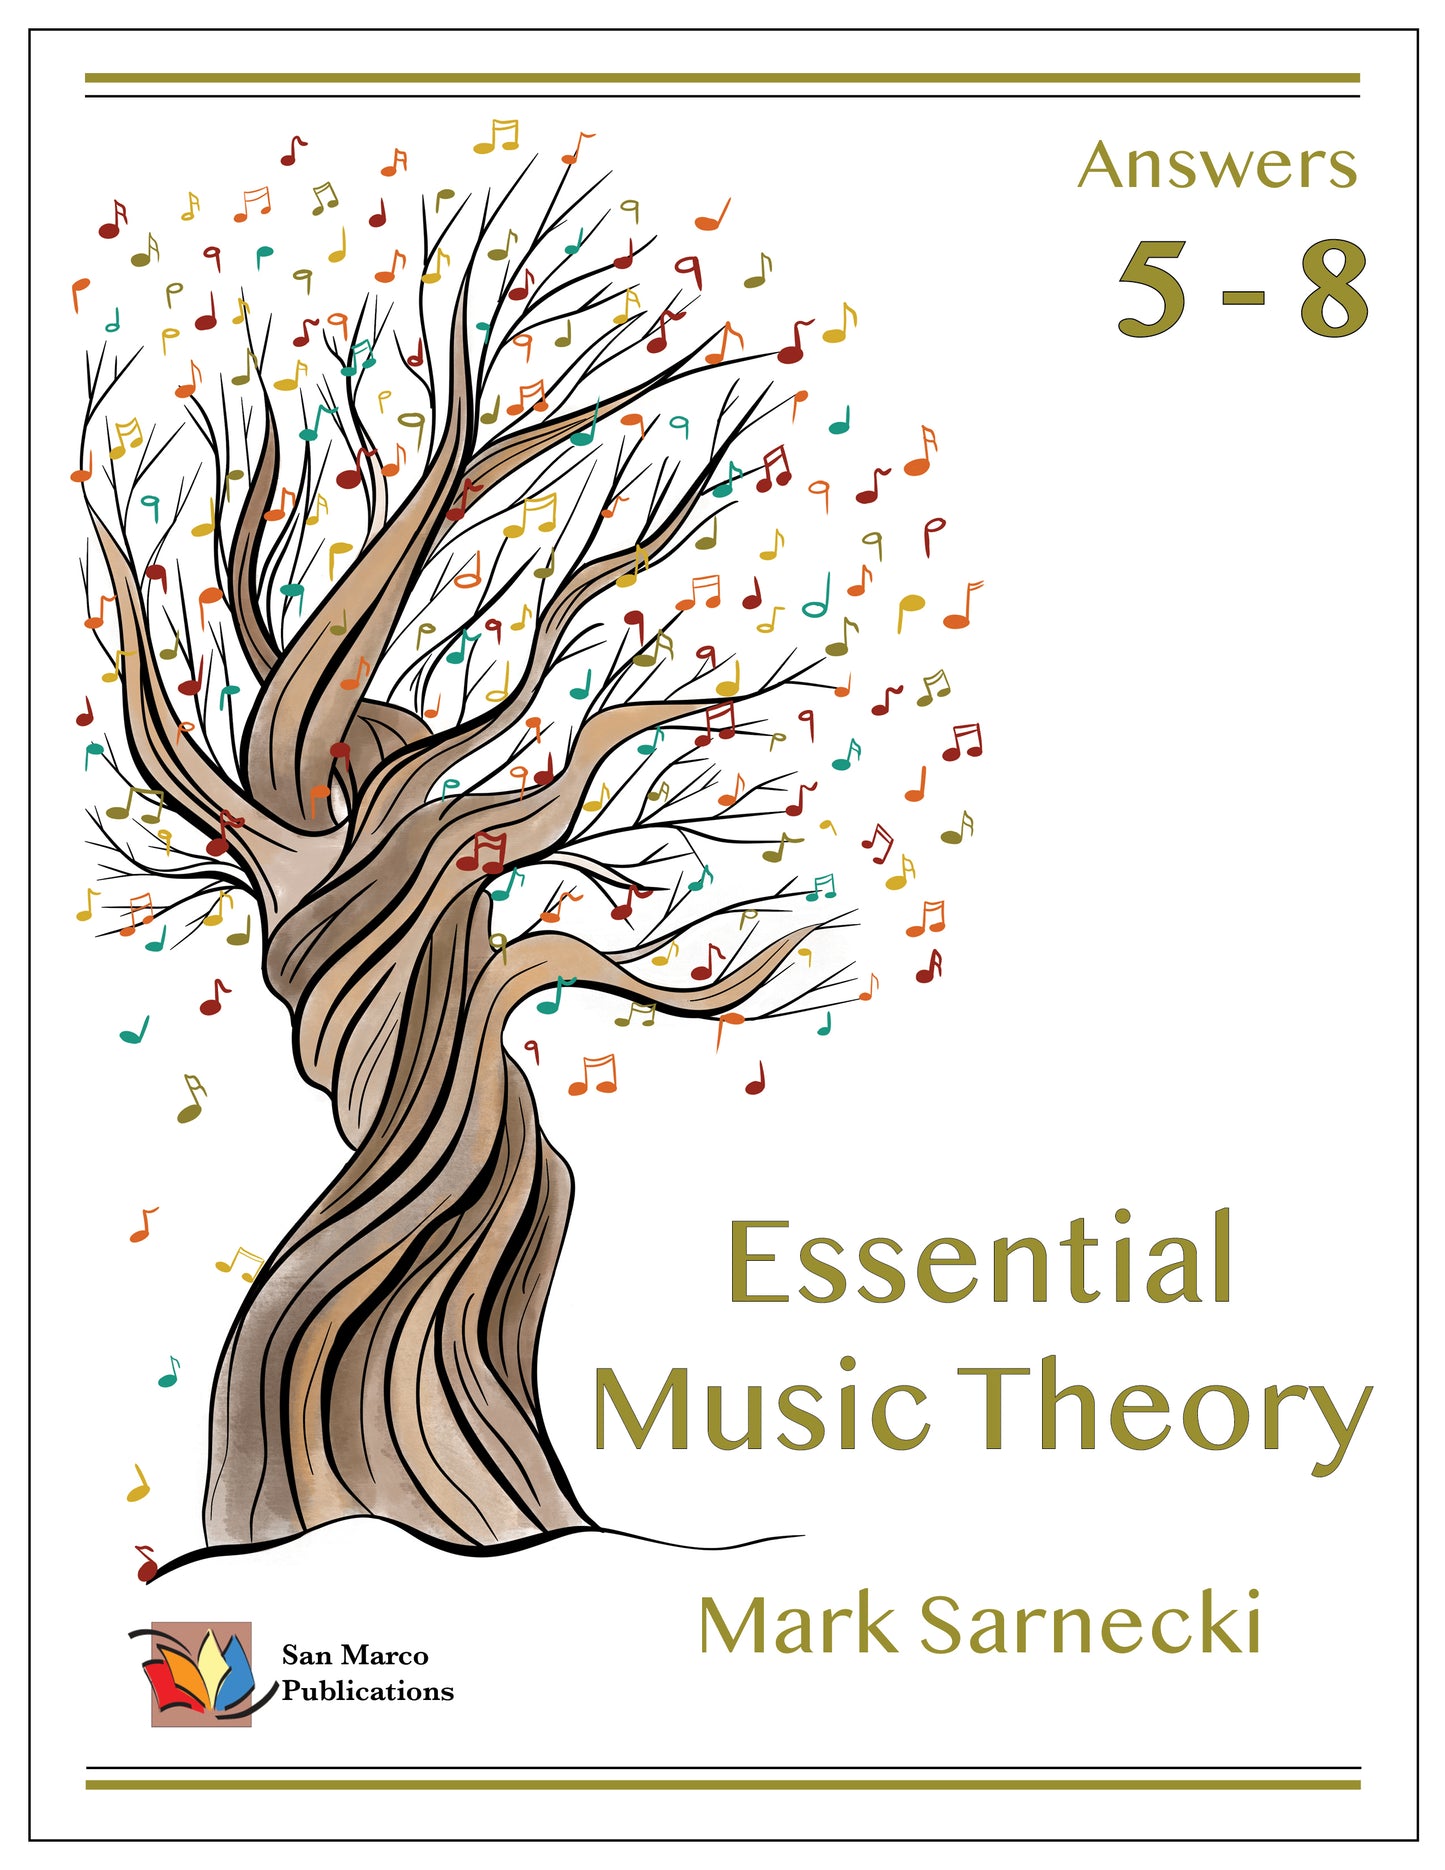 Essential Music Theory Answers Levels 5-8